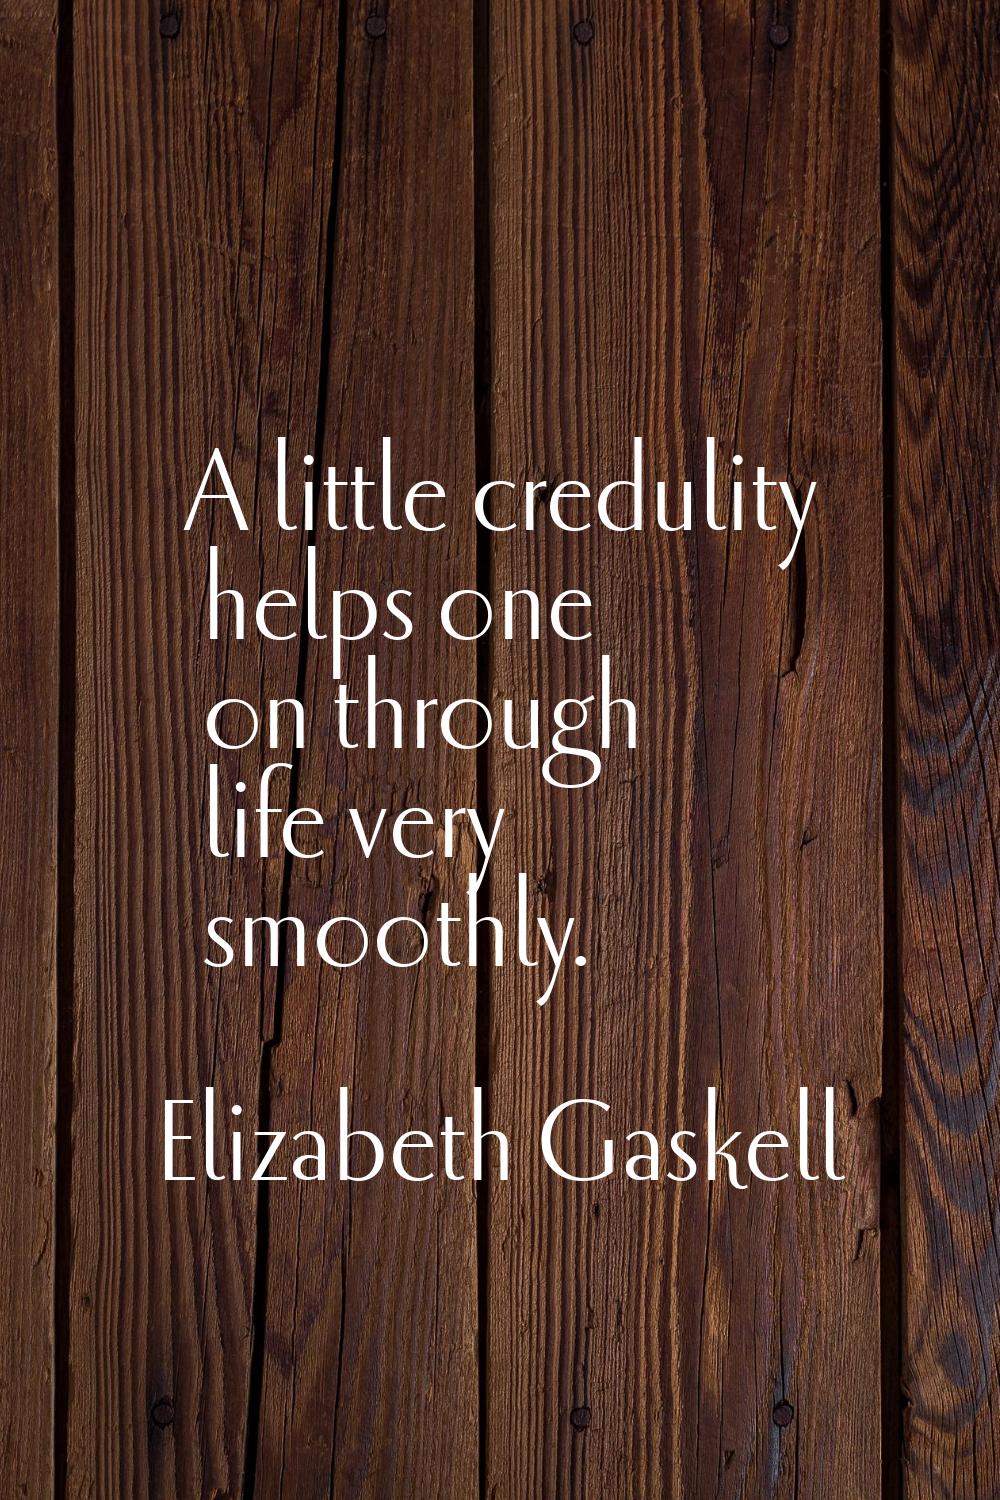 A little credulity helps one on through life very smoothly.